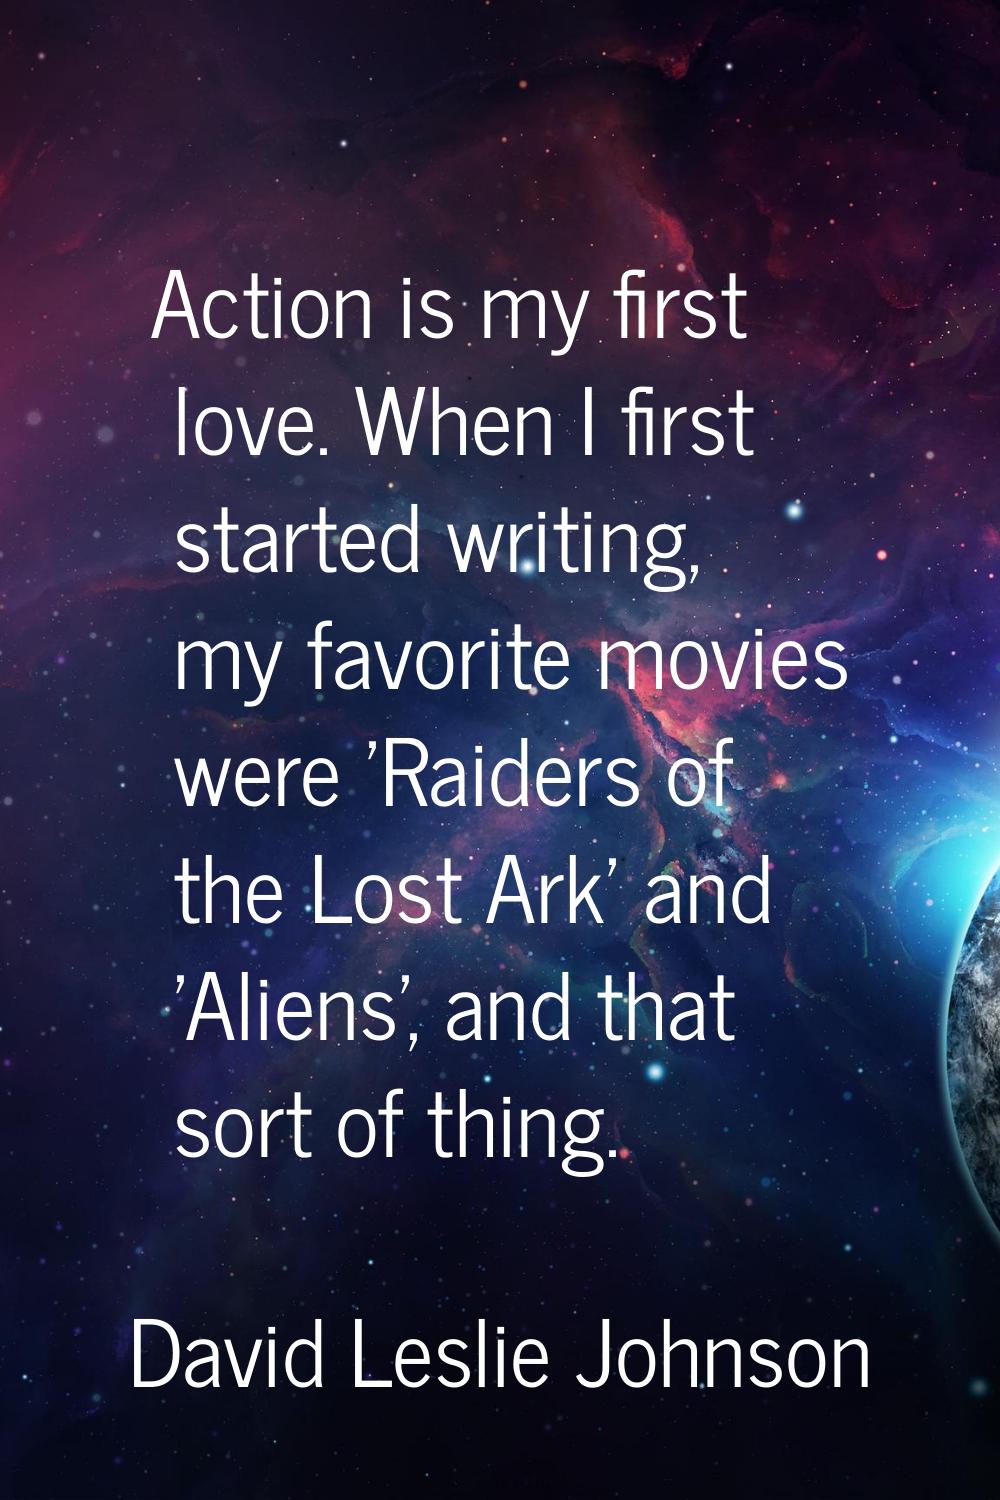 Action is my first love. When I first started writing, my favorite movies were 'Raiders of the Lost